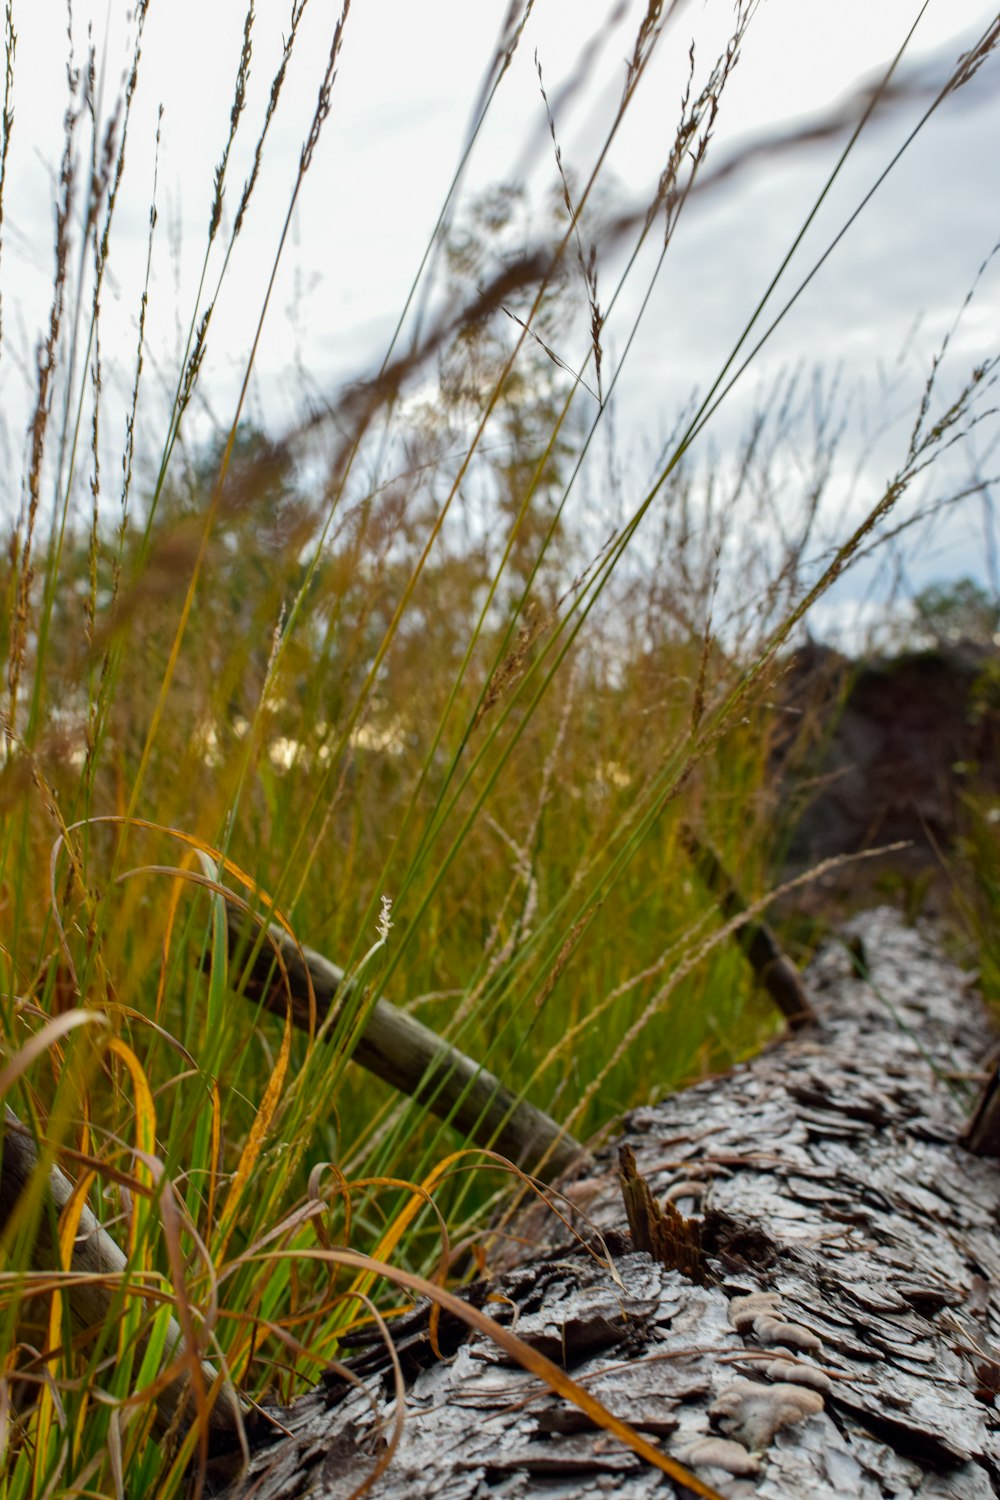 a close up of a log in a field of grass